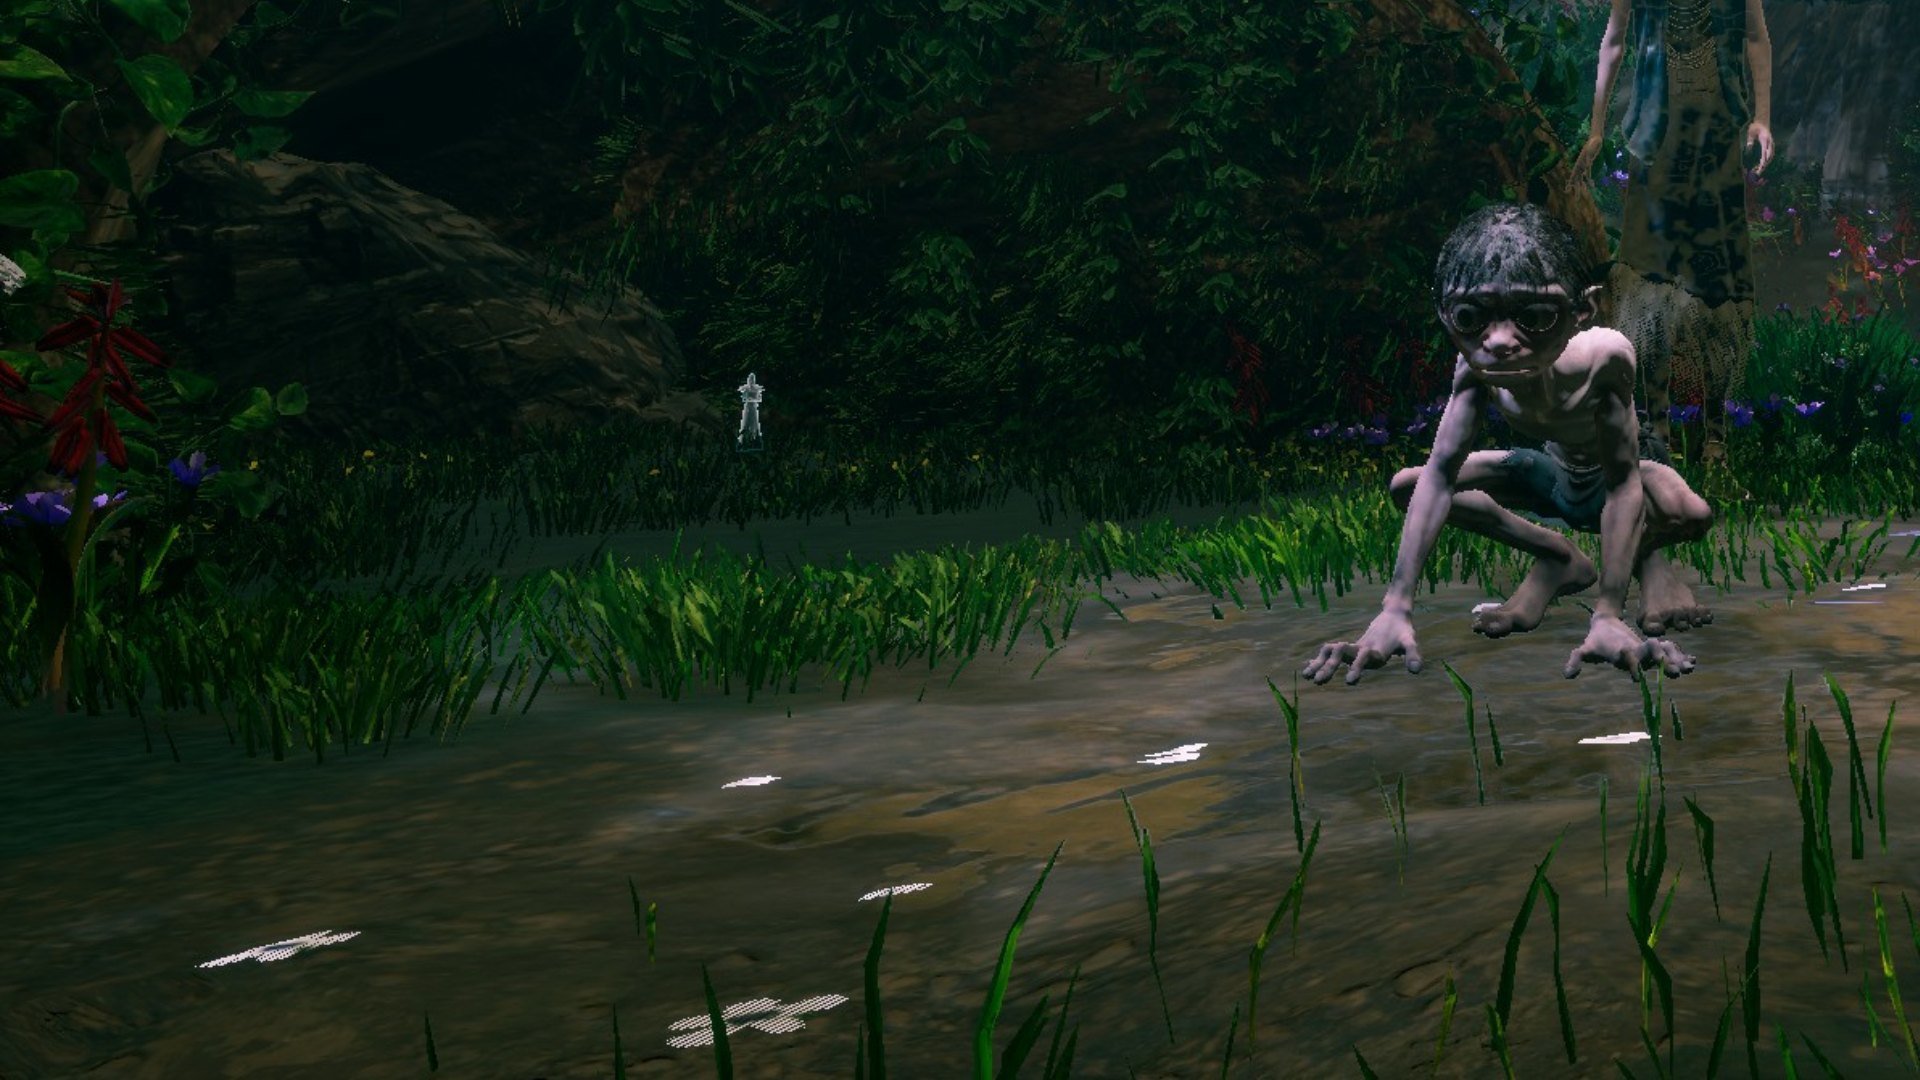 Gollum screenshot showing a log with a glowing figurine inside it, while Gollum stands in the foreground. 